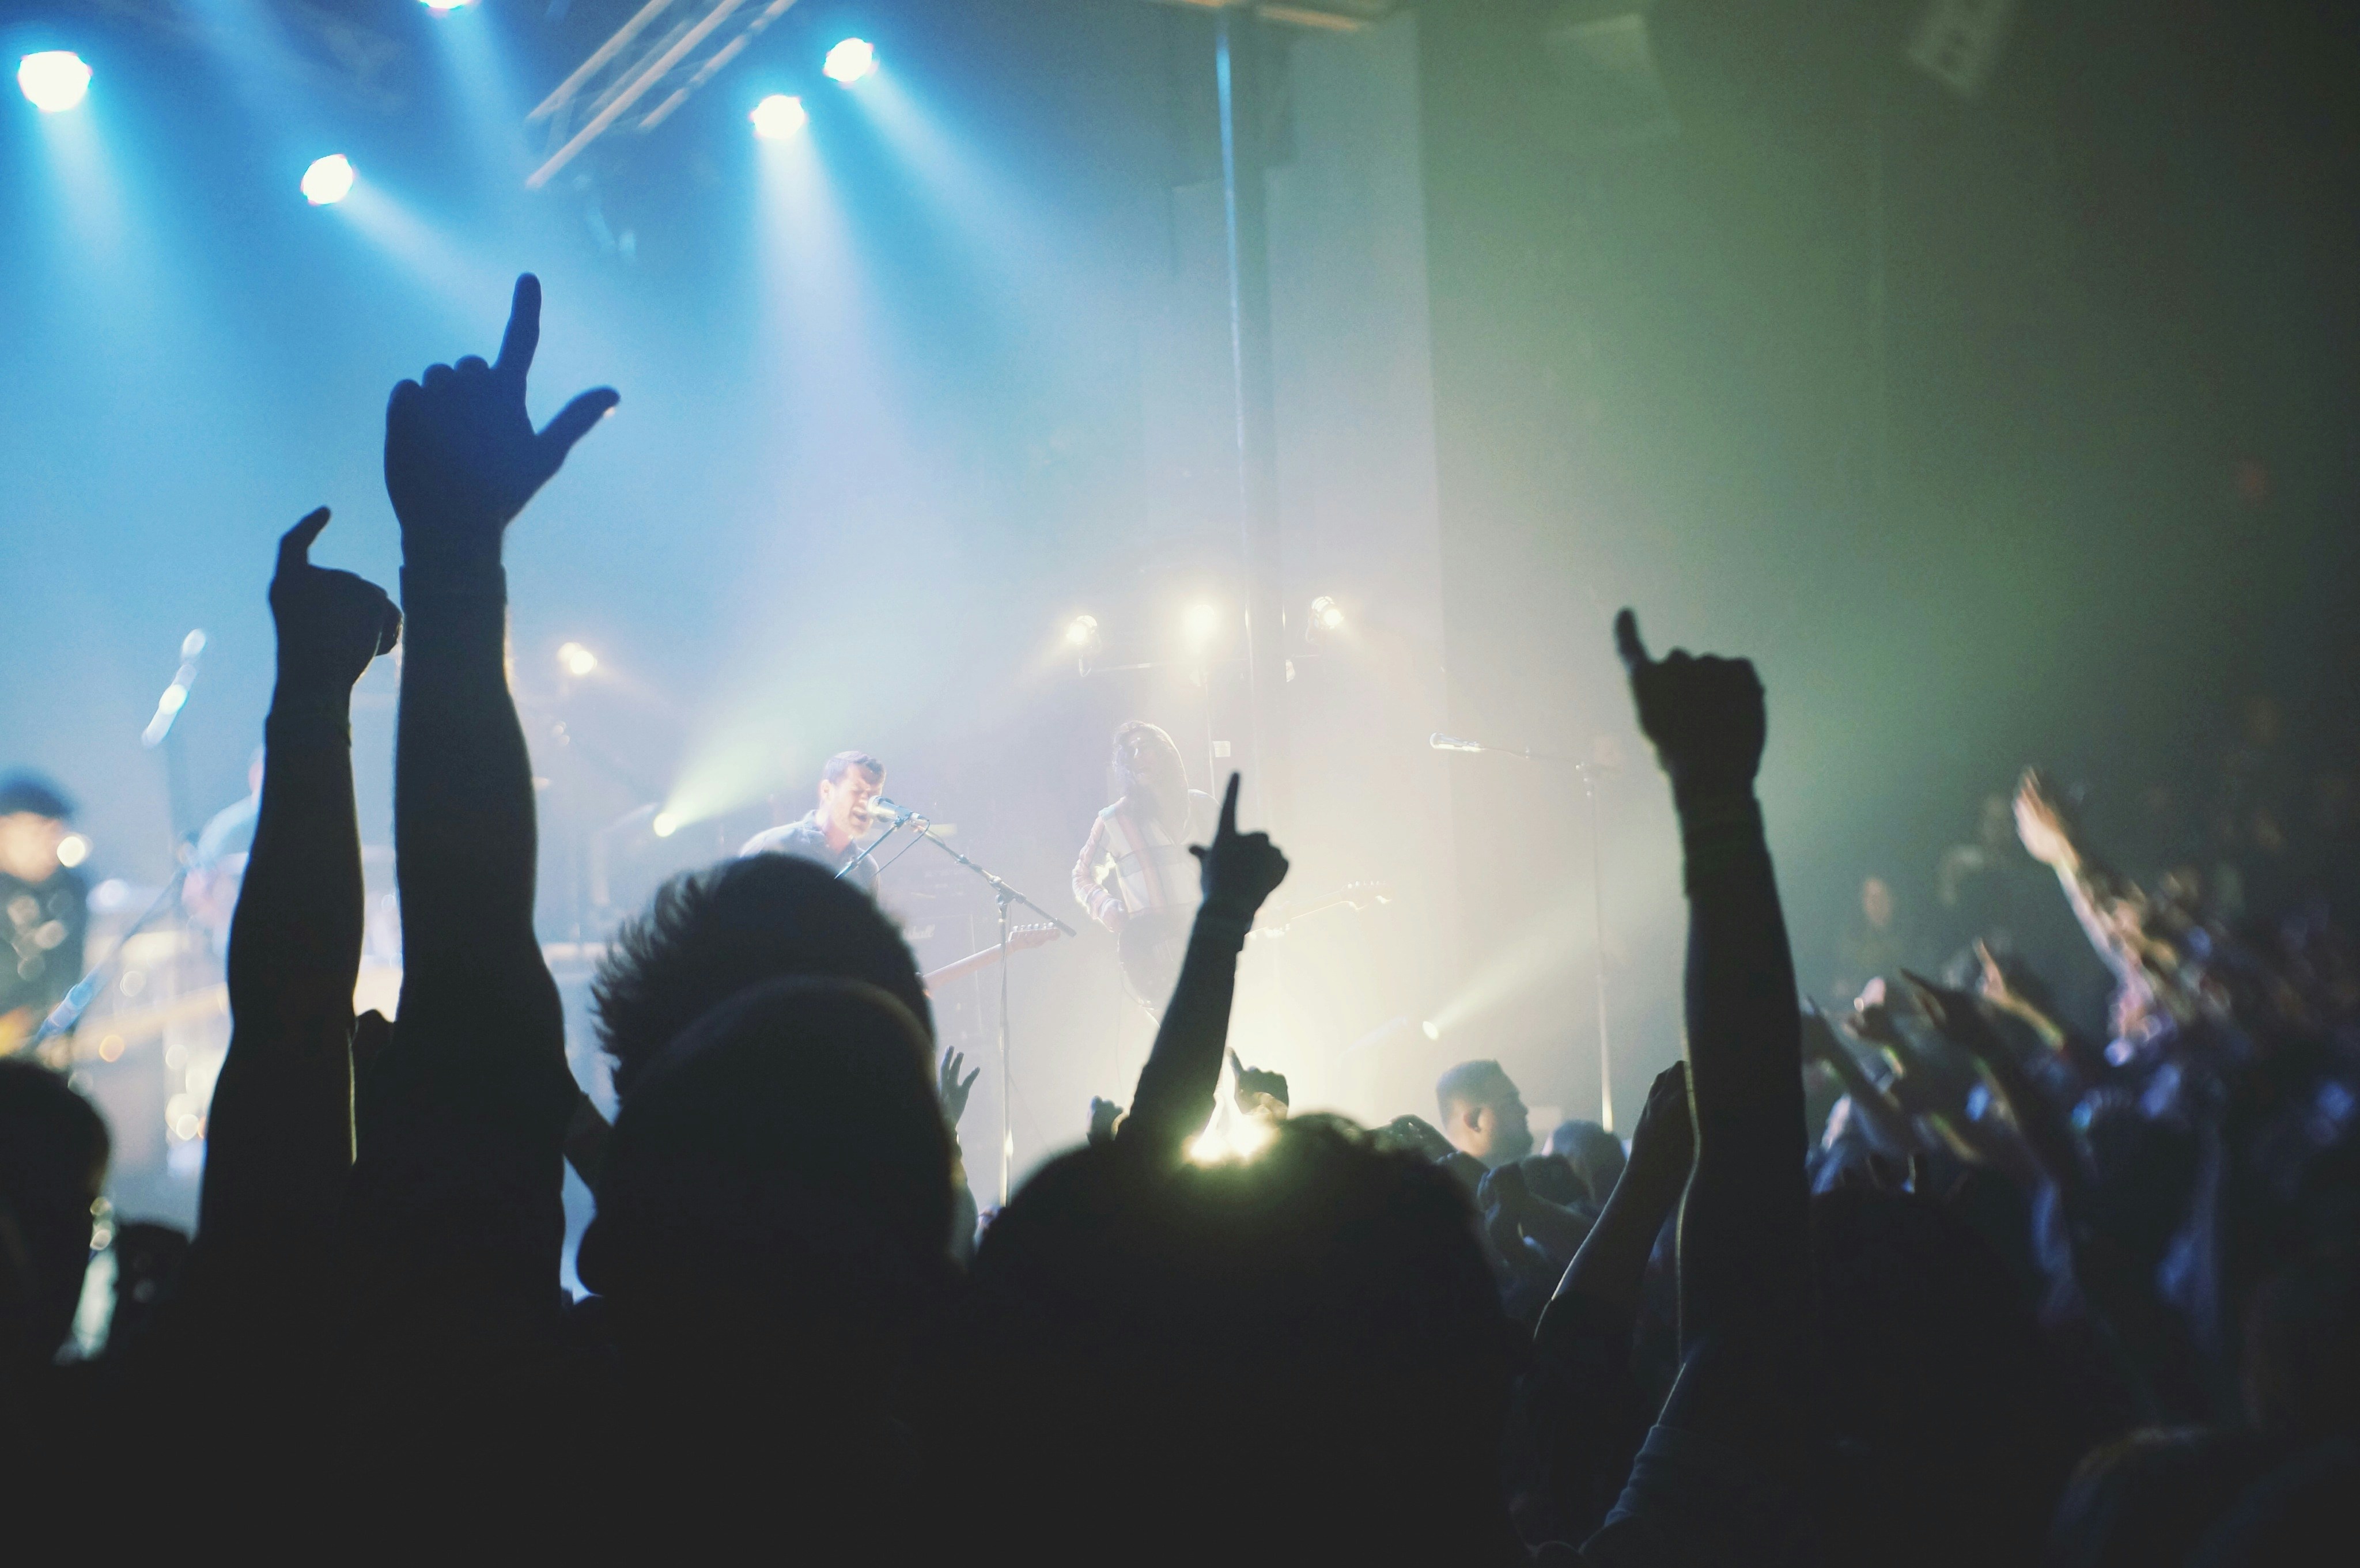 Hands up in the air at a rock concert